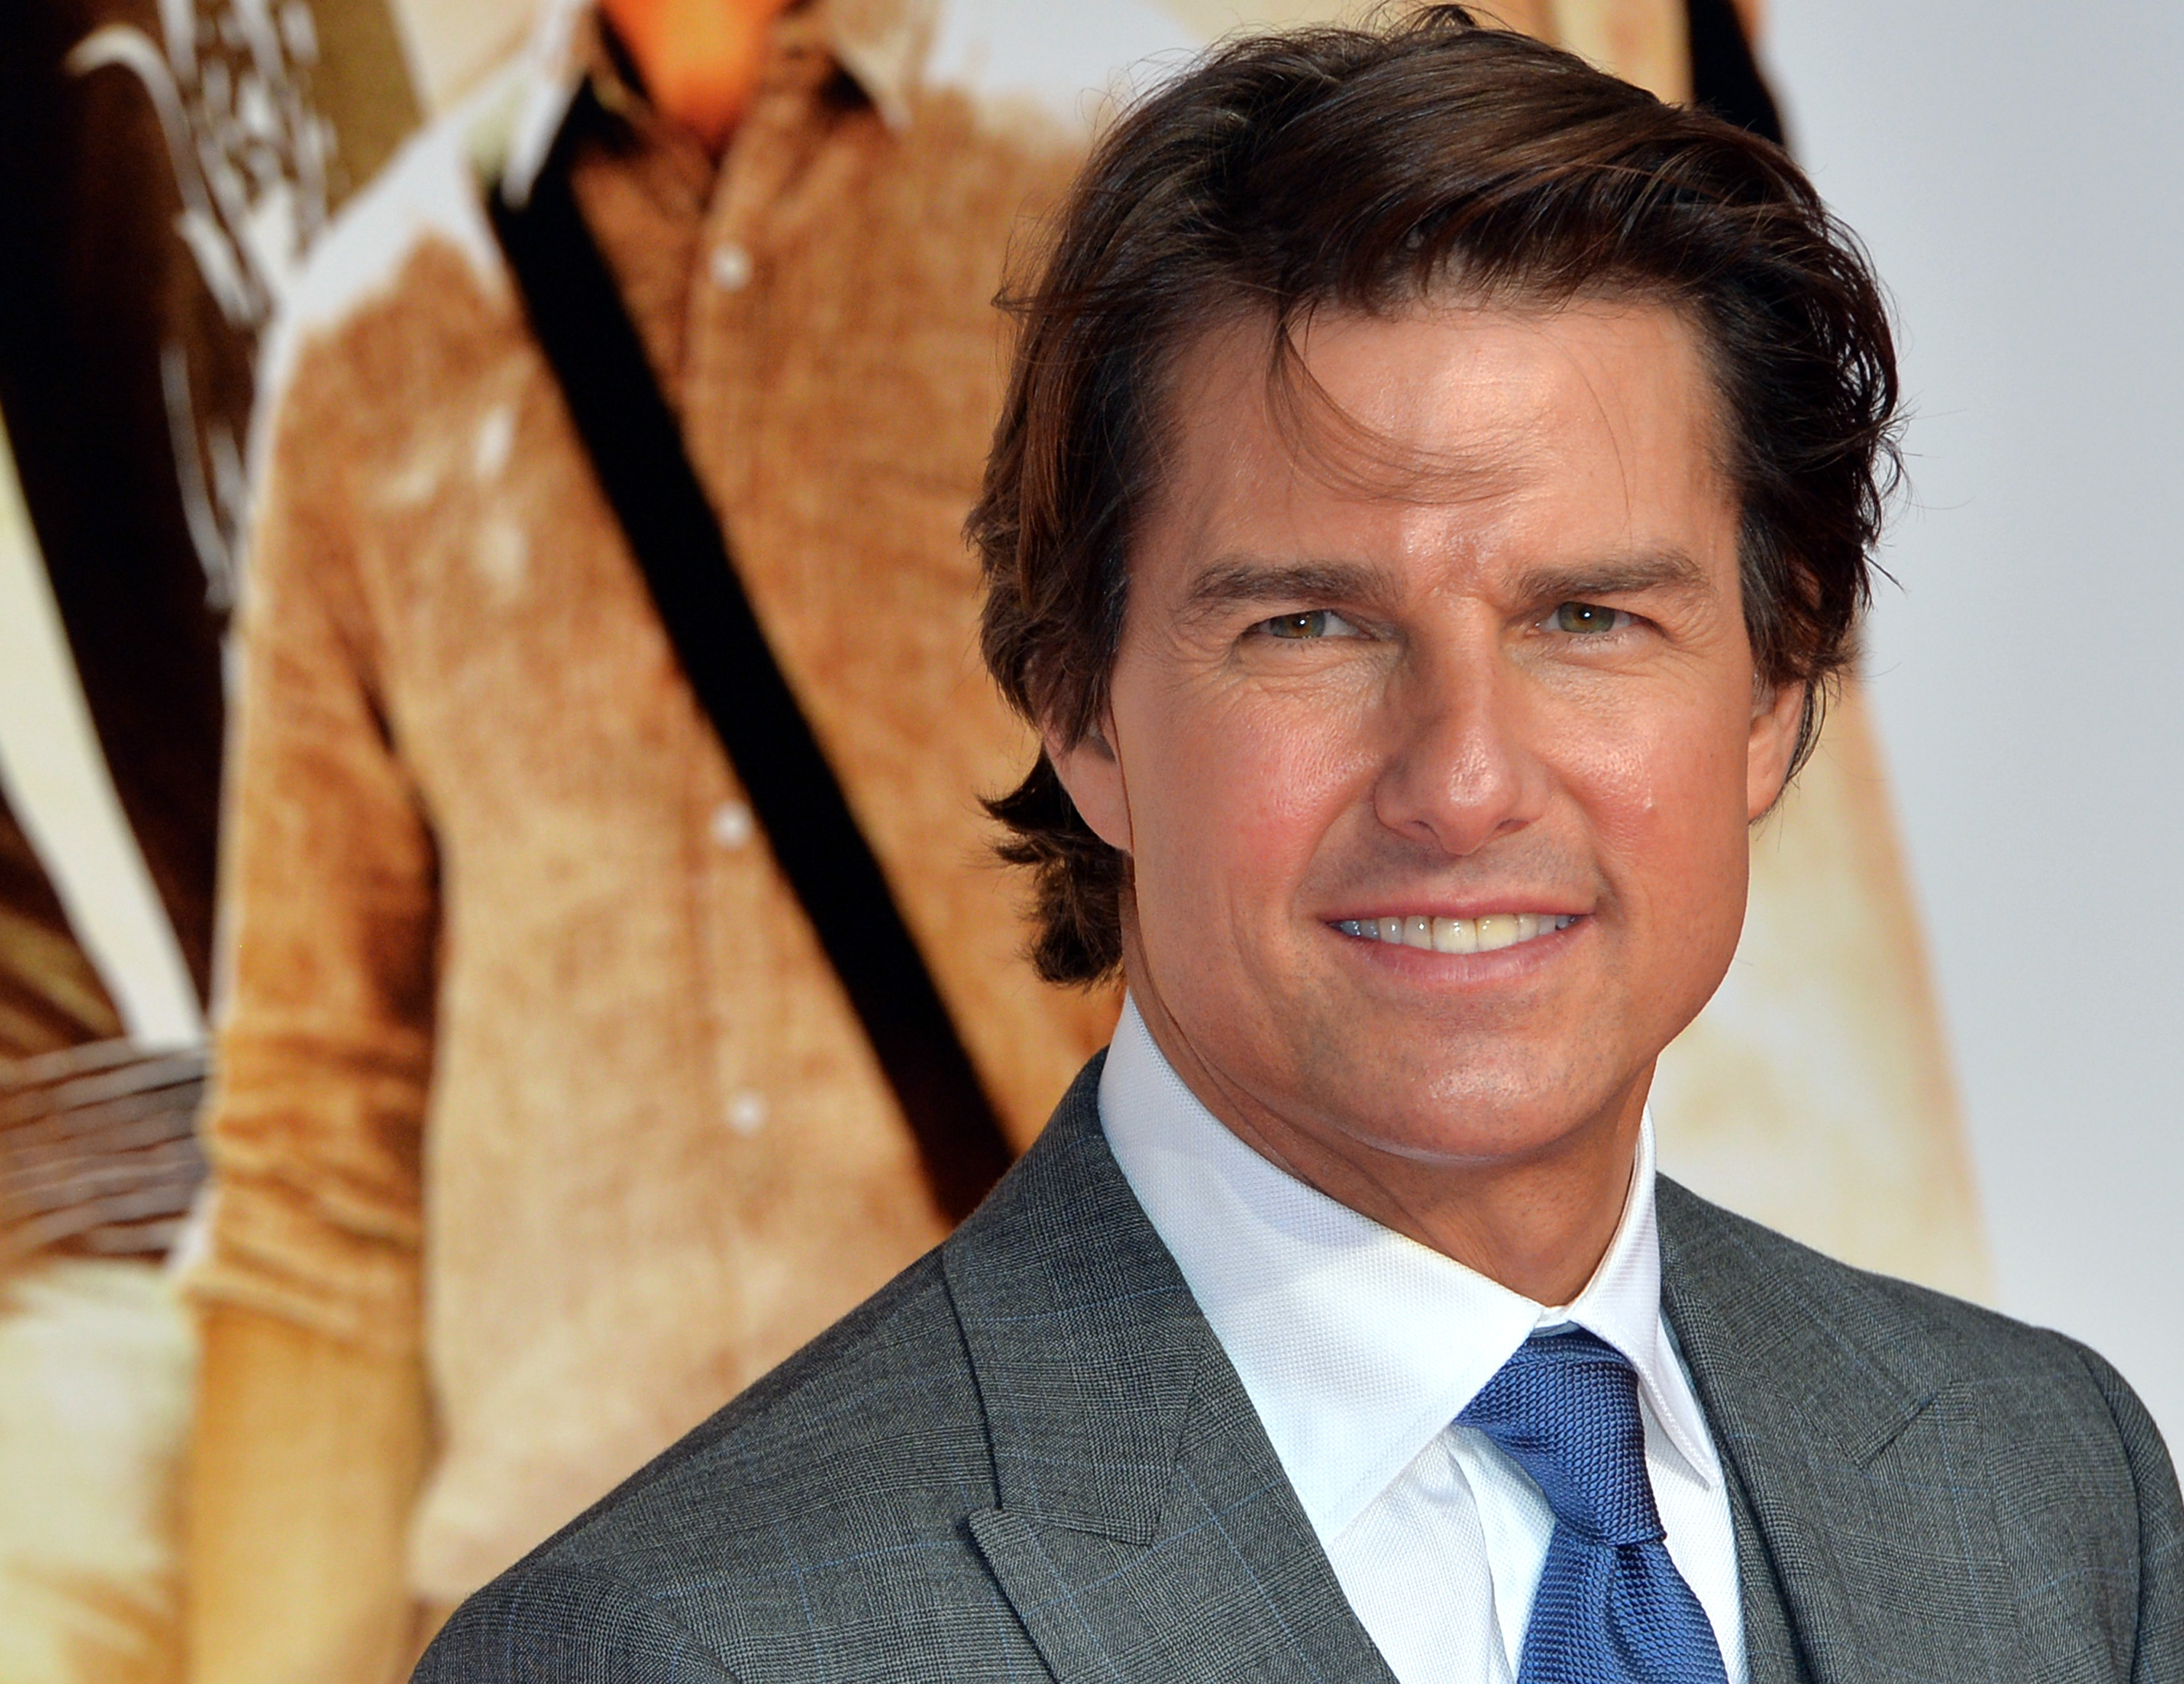 Tom Cruise 5 Fast Facts You Need to Know